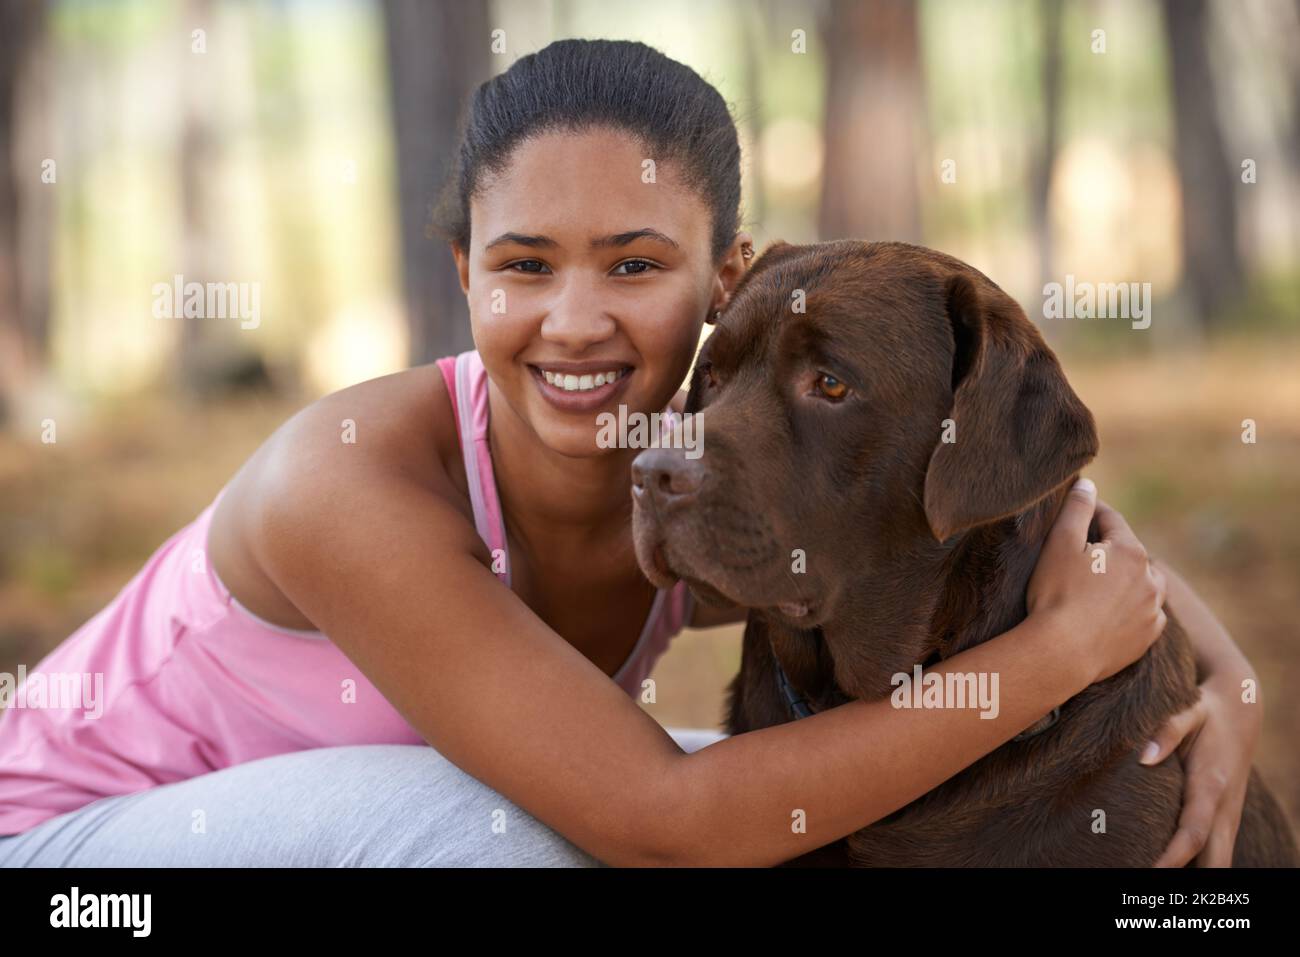 Spending time with my best friend. A young ethnic woman saitting outside with her dog. Stock Photo